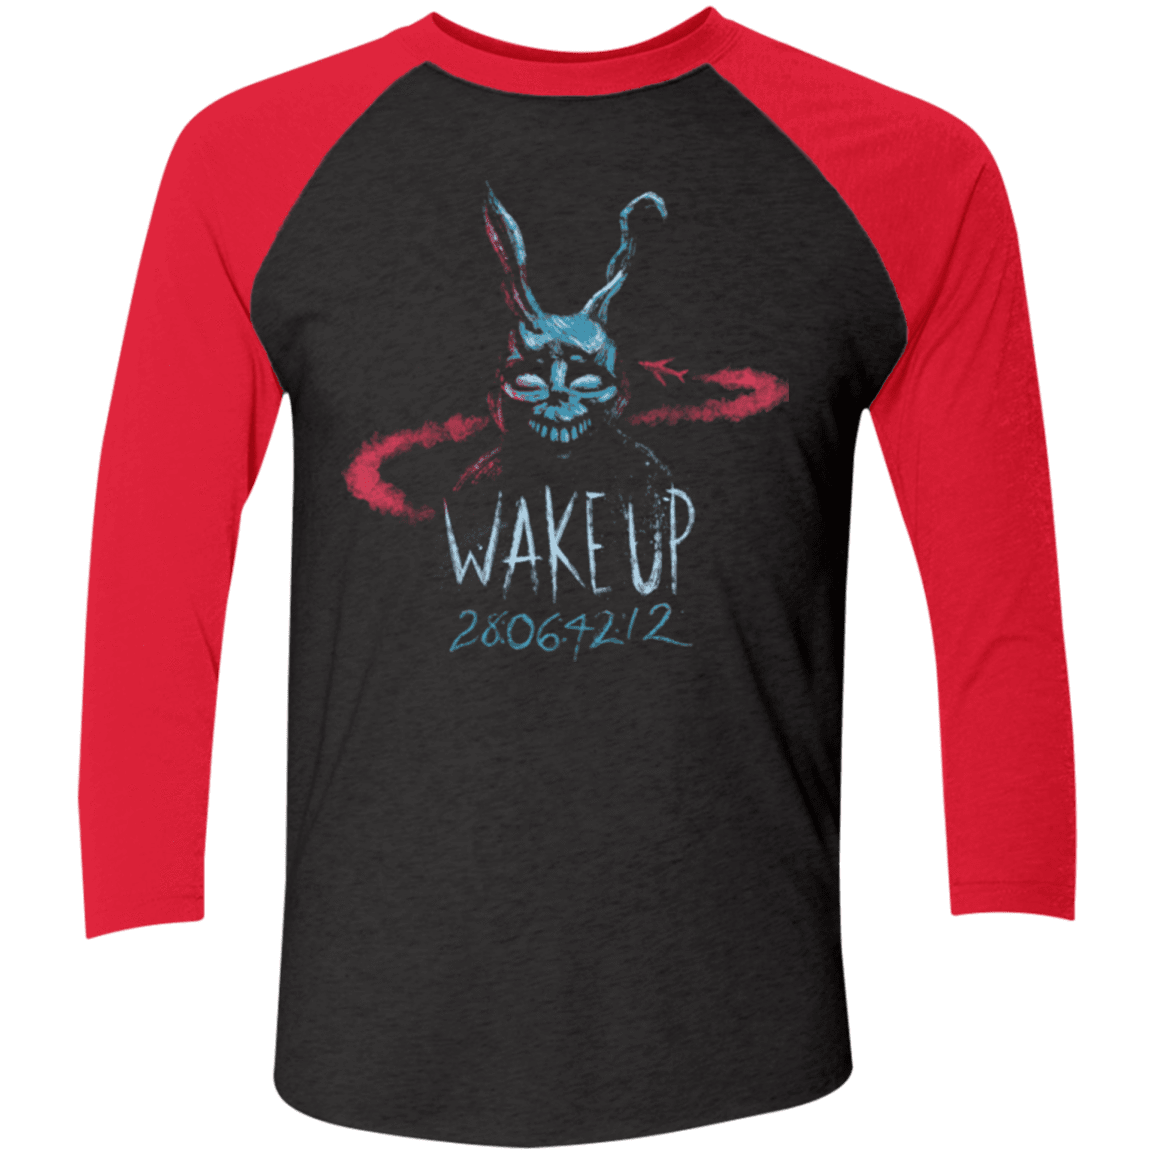 T-Shirts Vintage Black/Vintage Red / X-Small Wake up 28064212 Men's Triblend 3/4 Sleeve